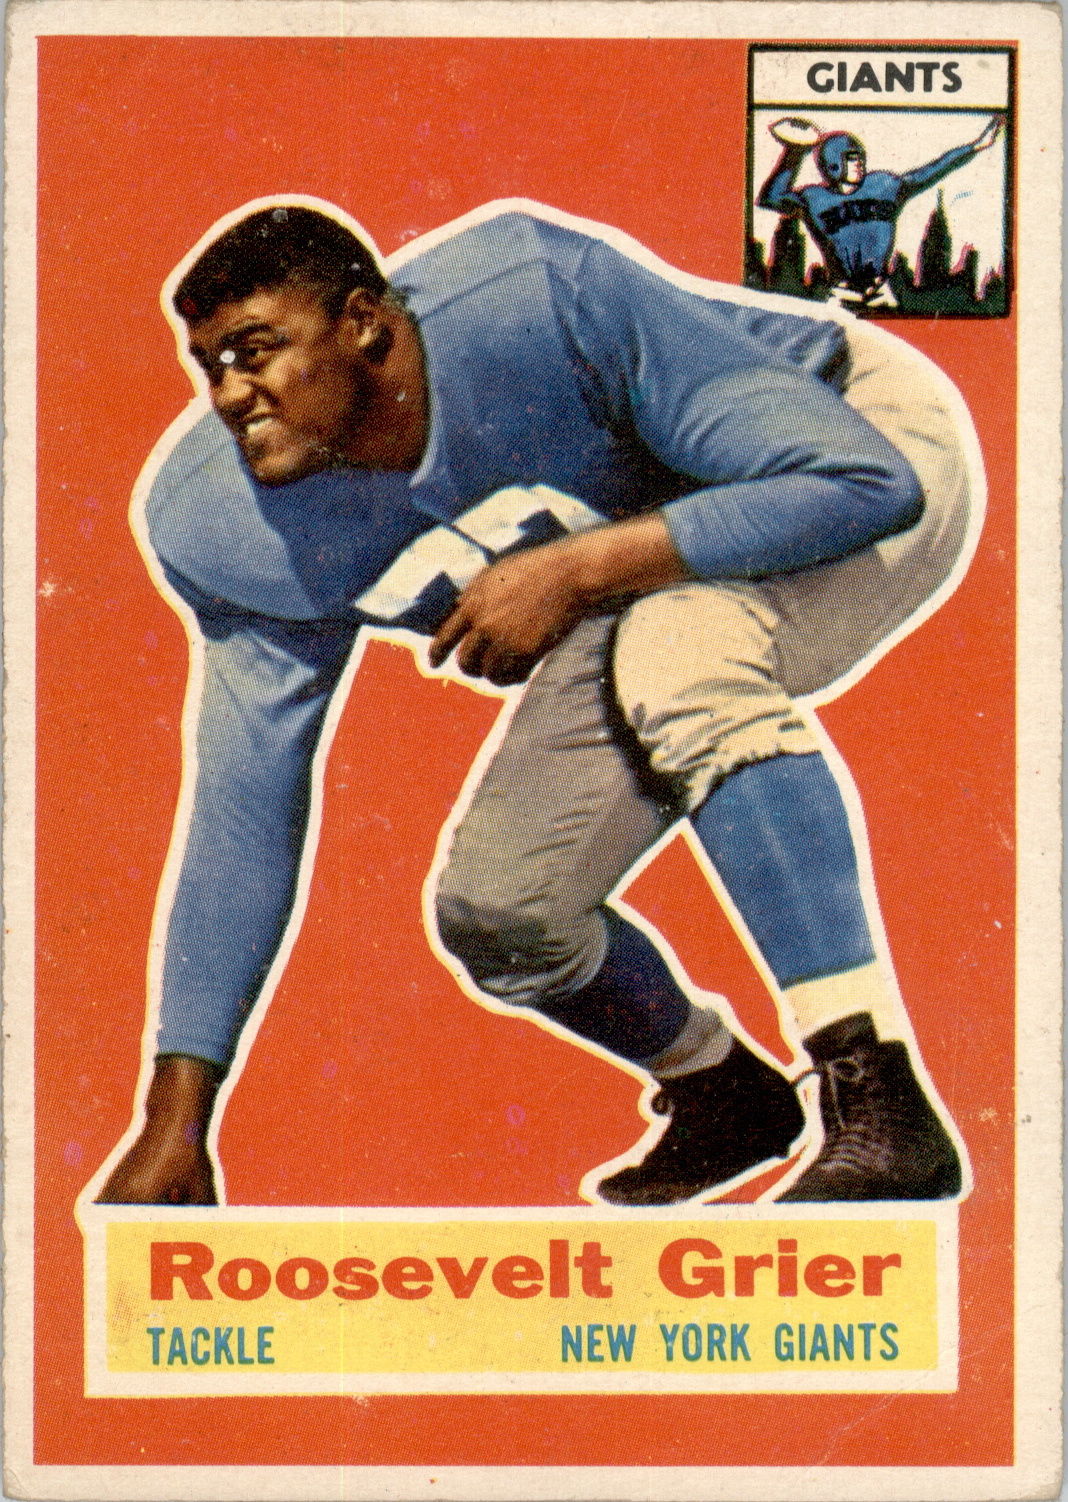  Rosey Grier player image